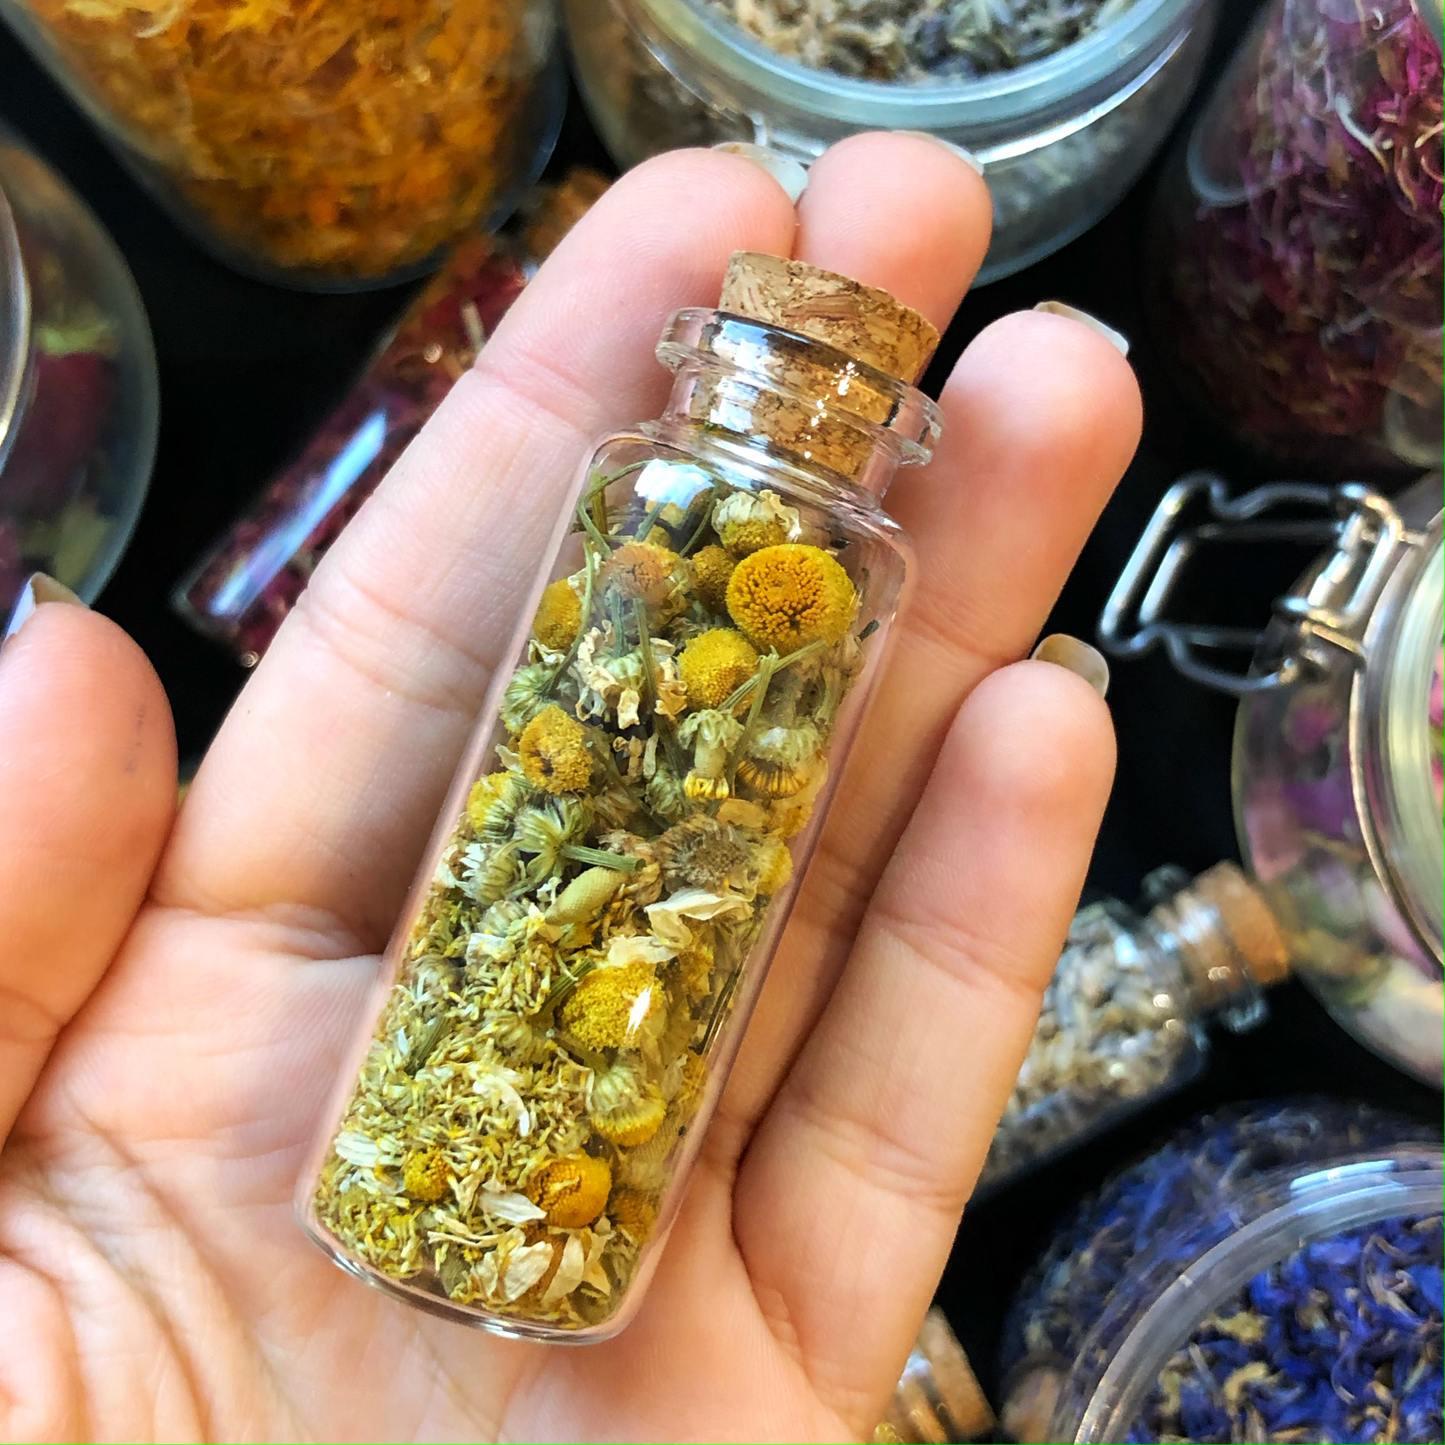 Fiole de Camomille / Herbal Witch Bottle